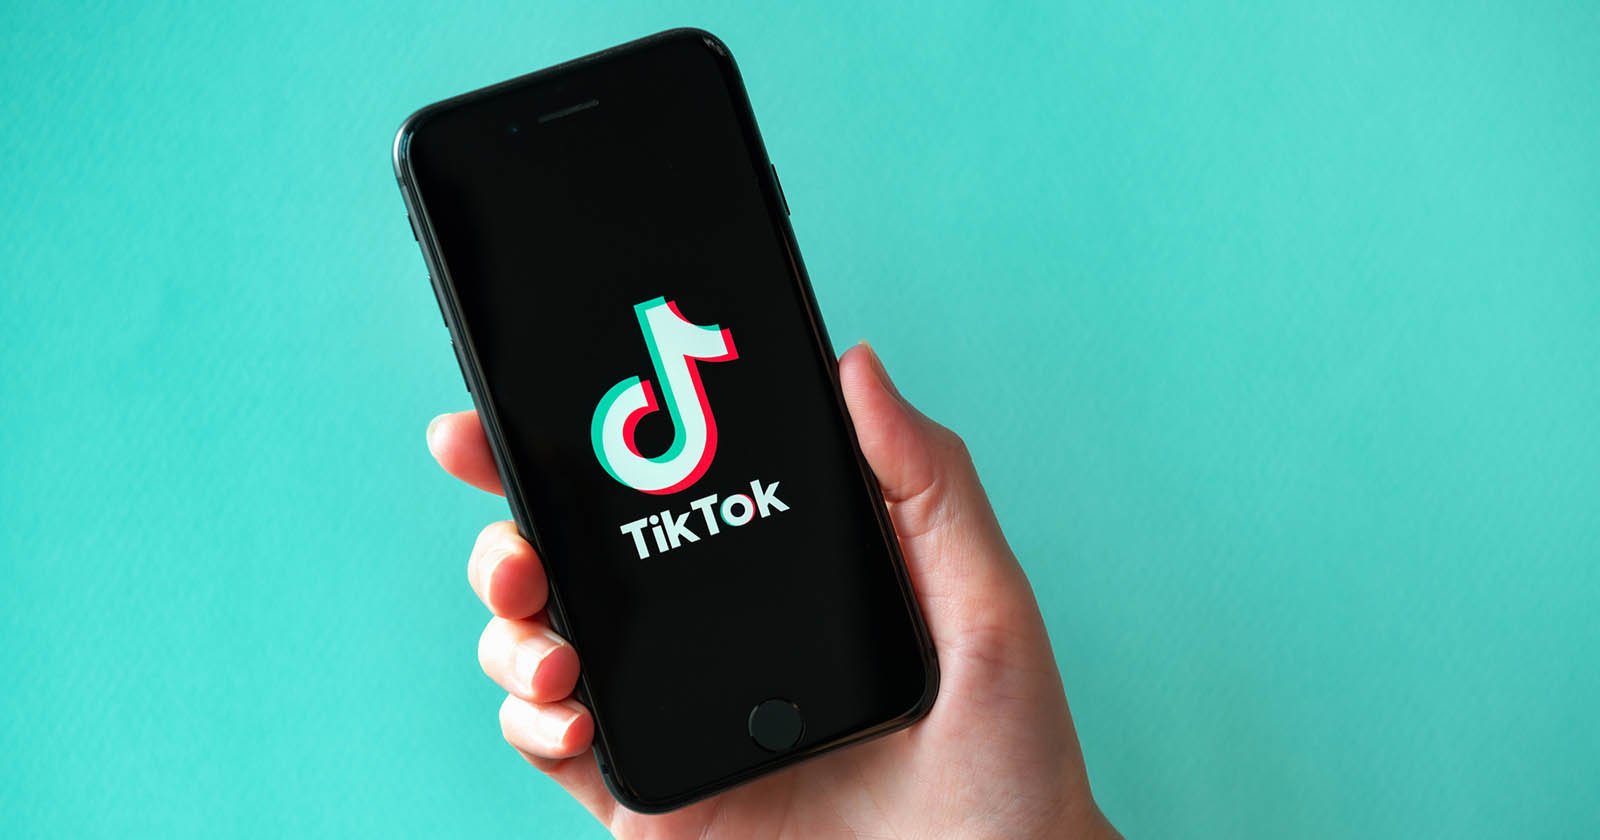  european commission bans staff from using tiktok due 